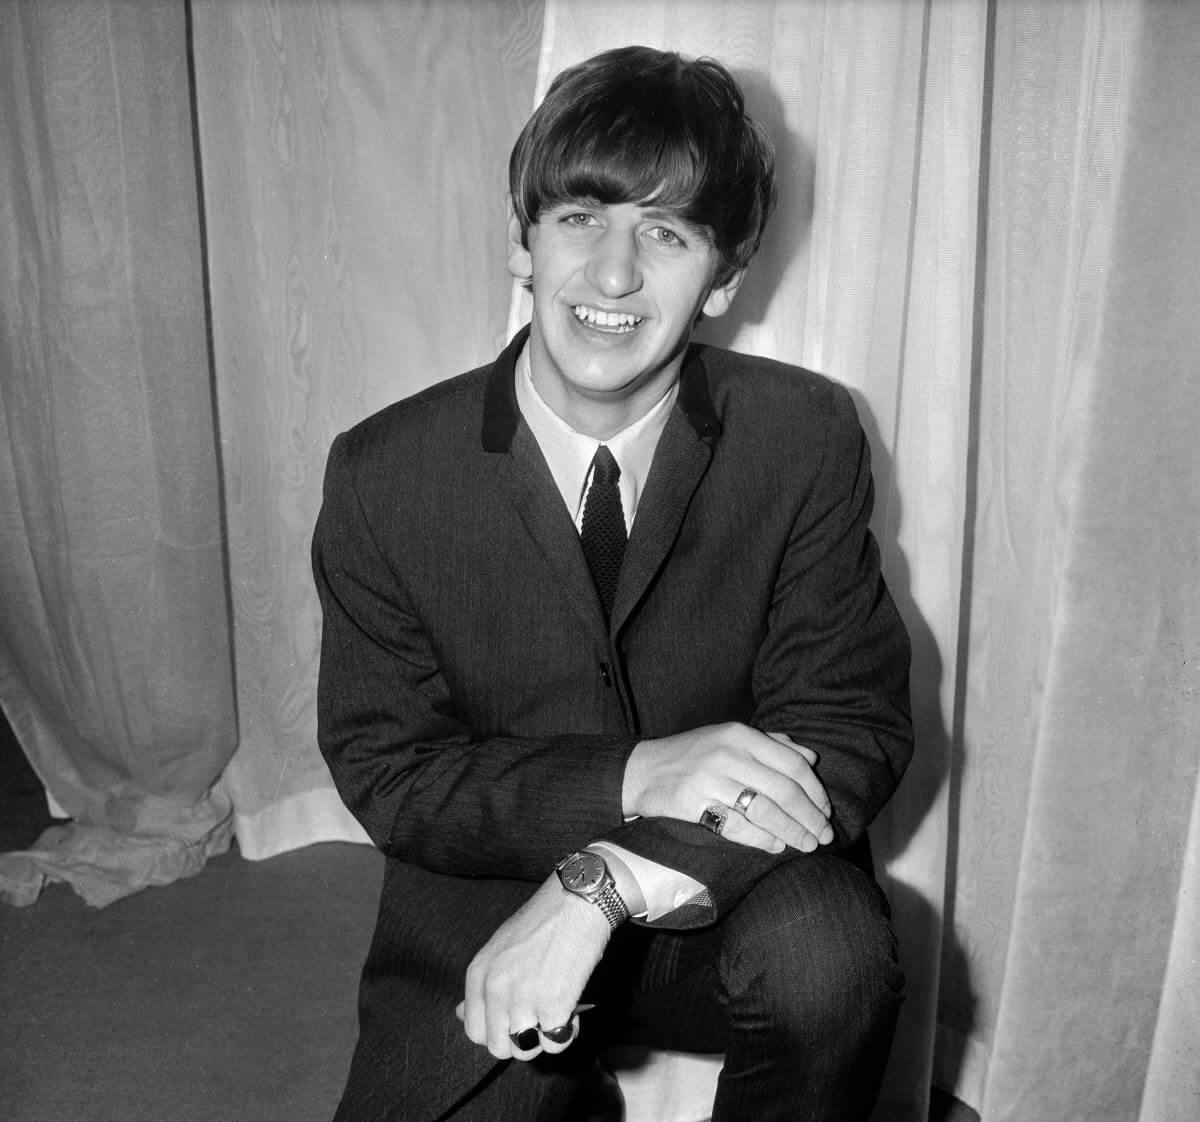 A black and white picture of Ringo Starr wearing a suit and kneeling.